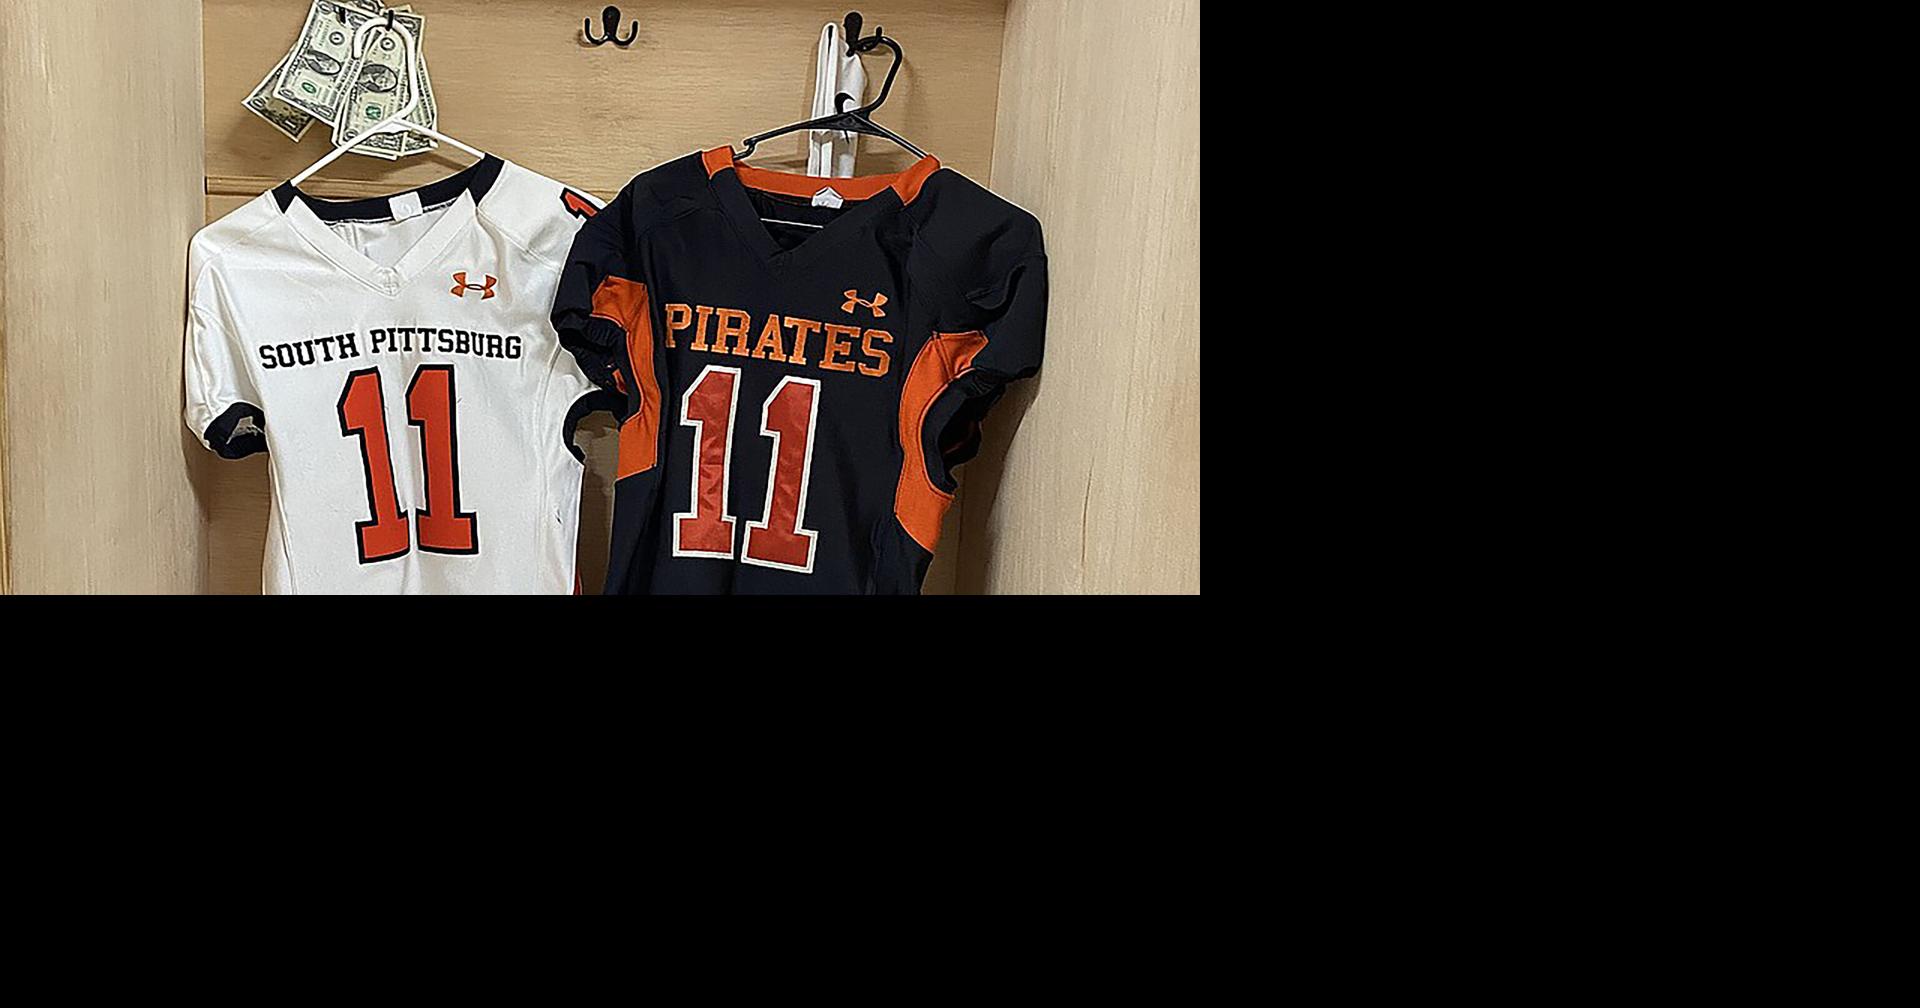 South Pittsburg football team draws inspiration from tragedy